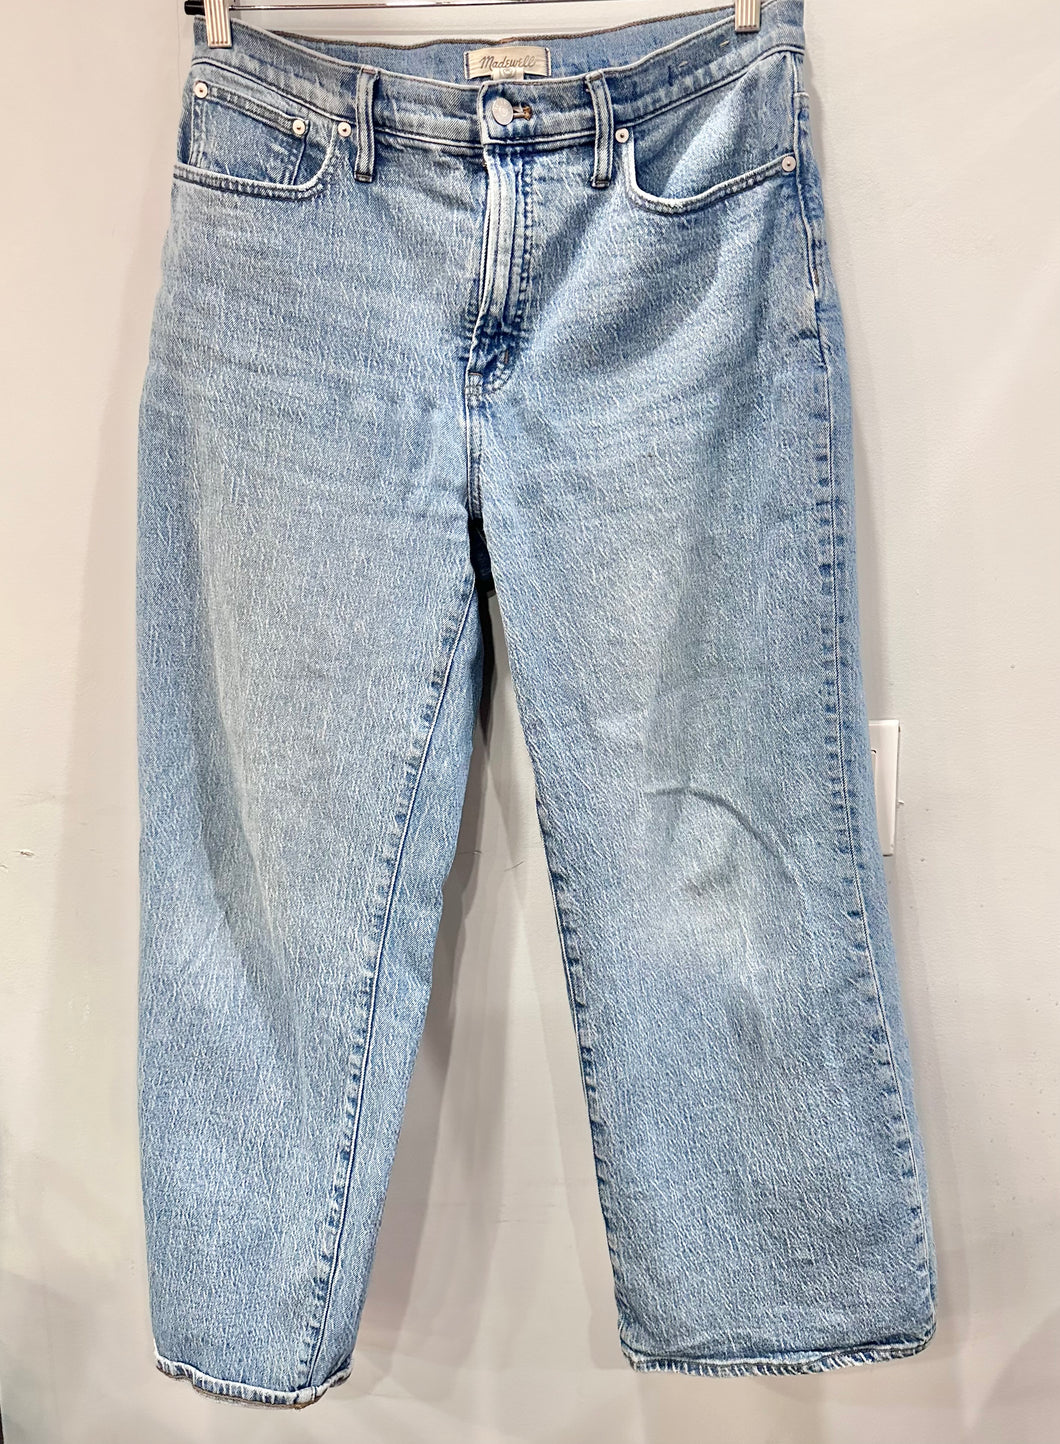 Madewell Wide-Leg Jeans Size 31